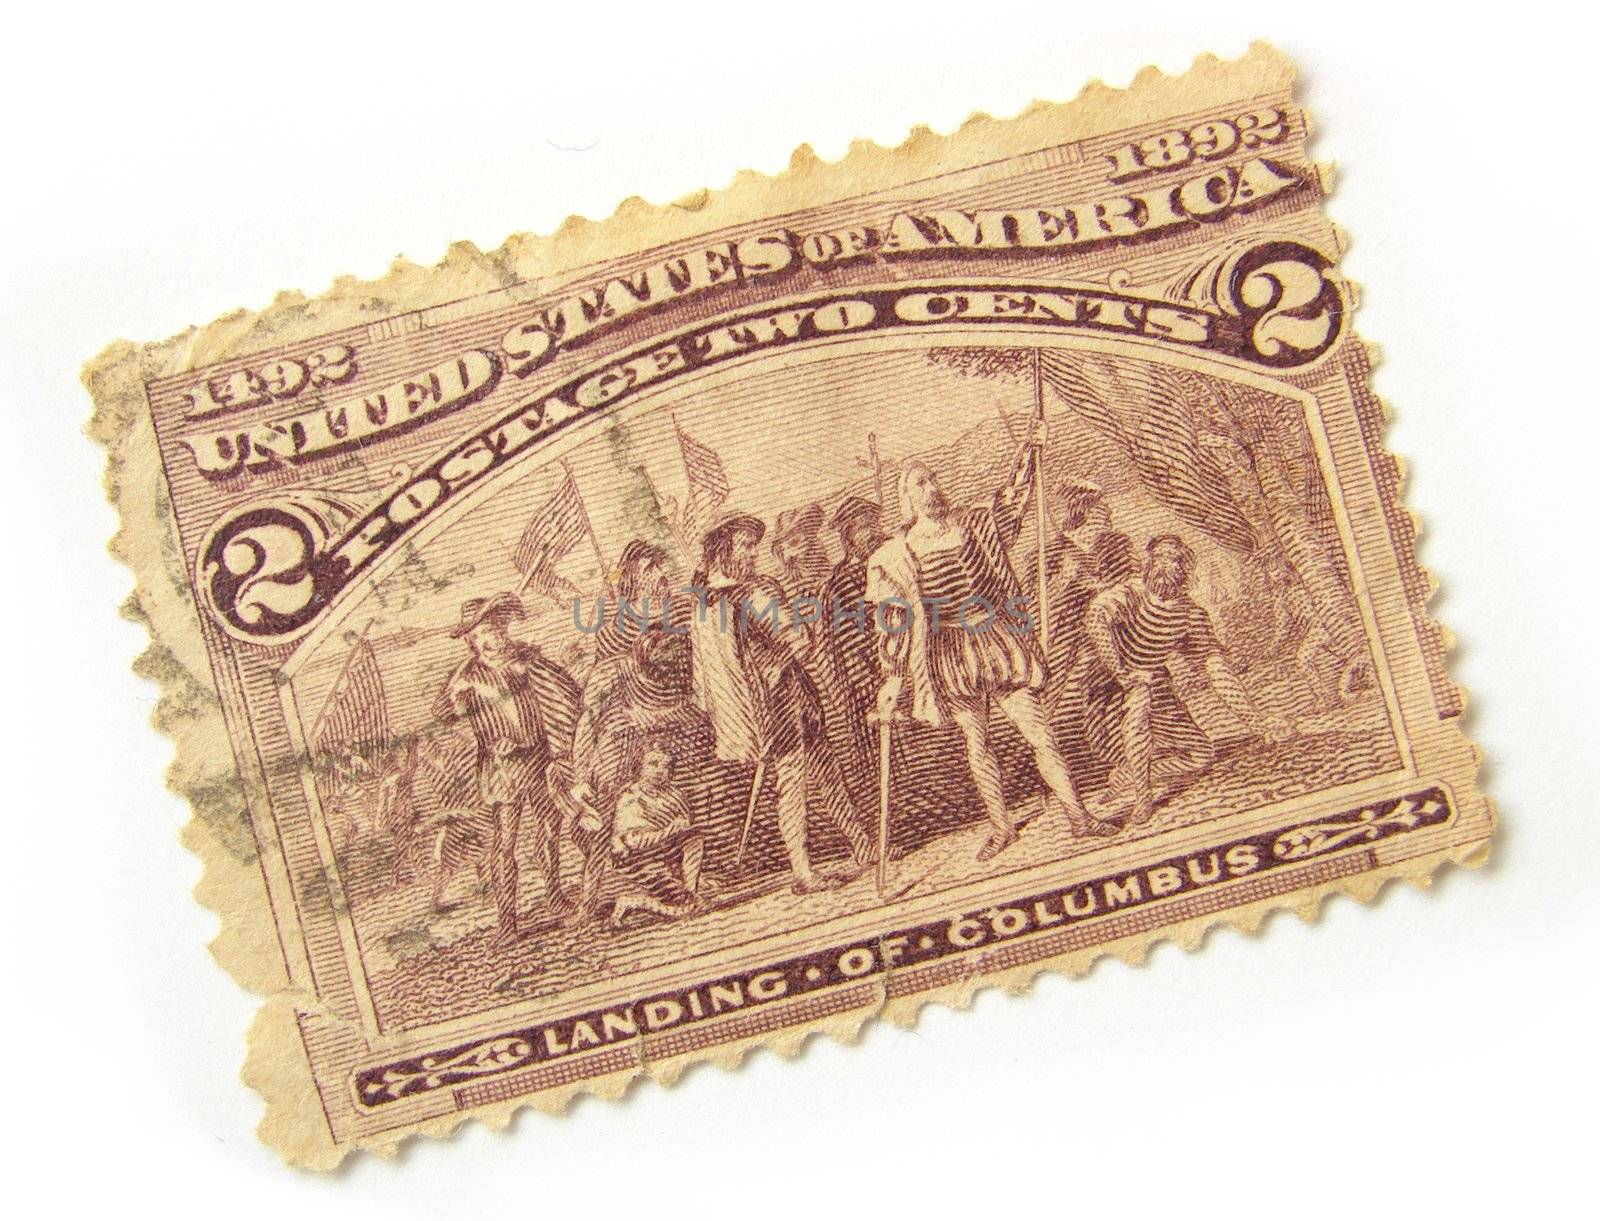 Old US postage stamp with the landing of Columbus                    